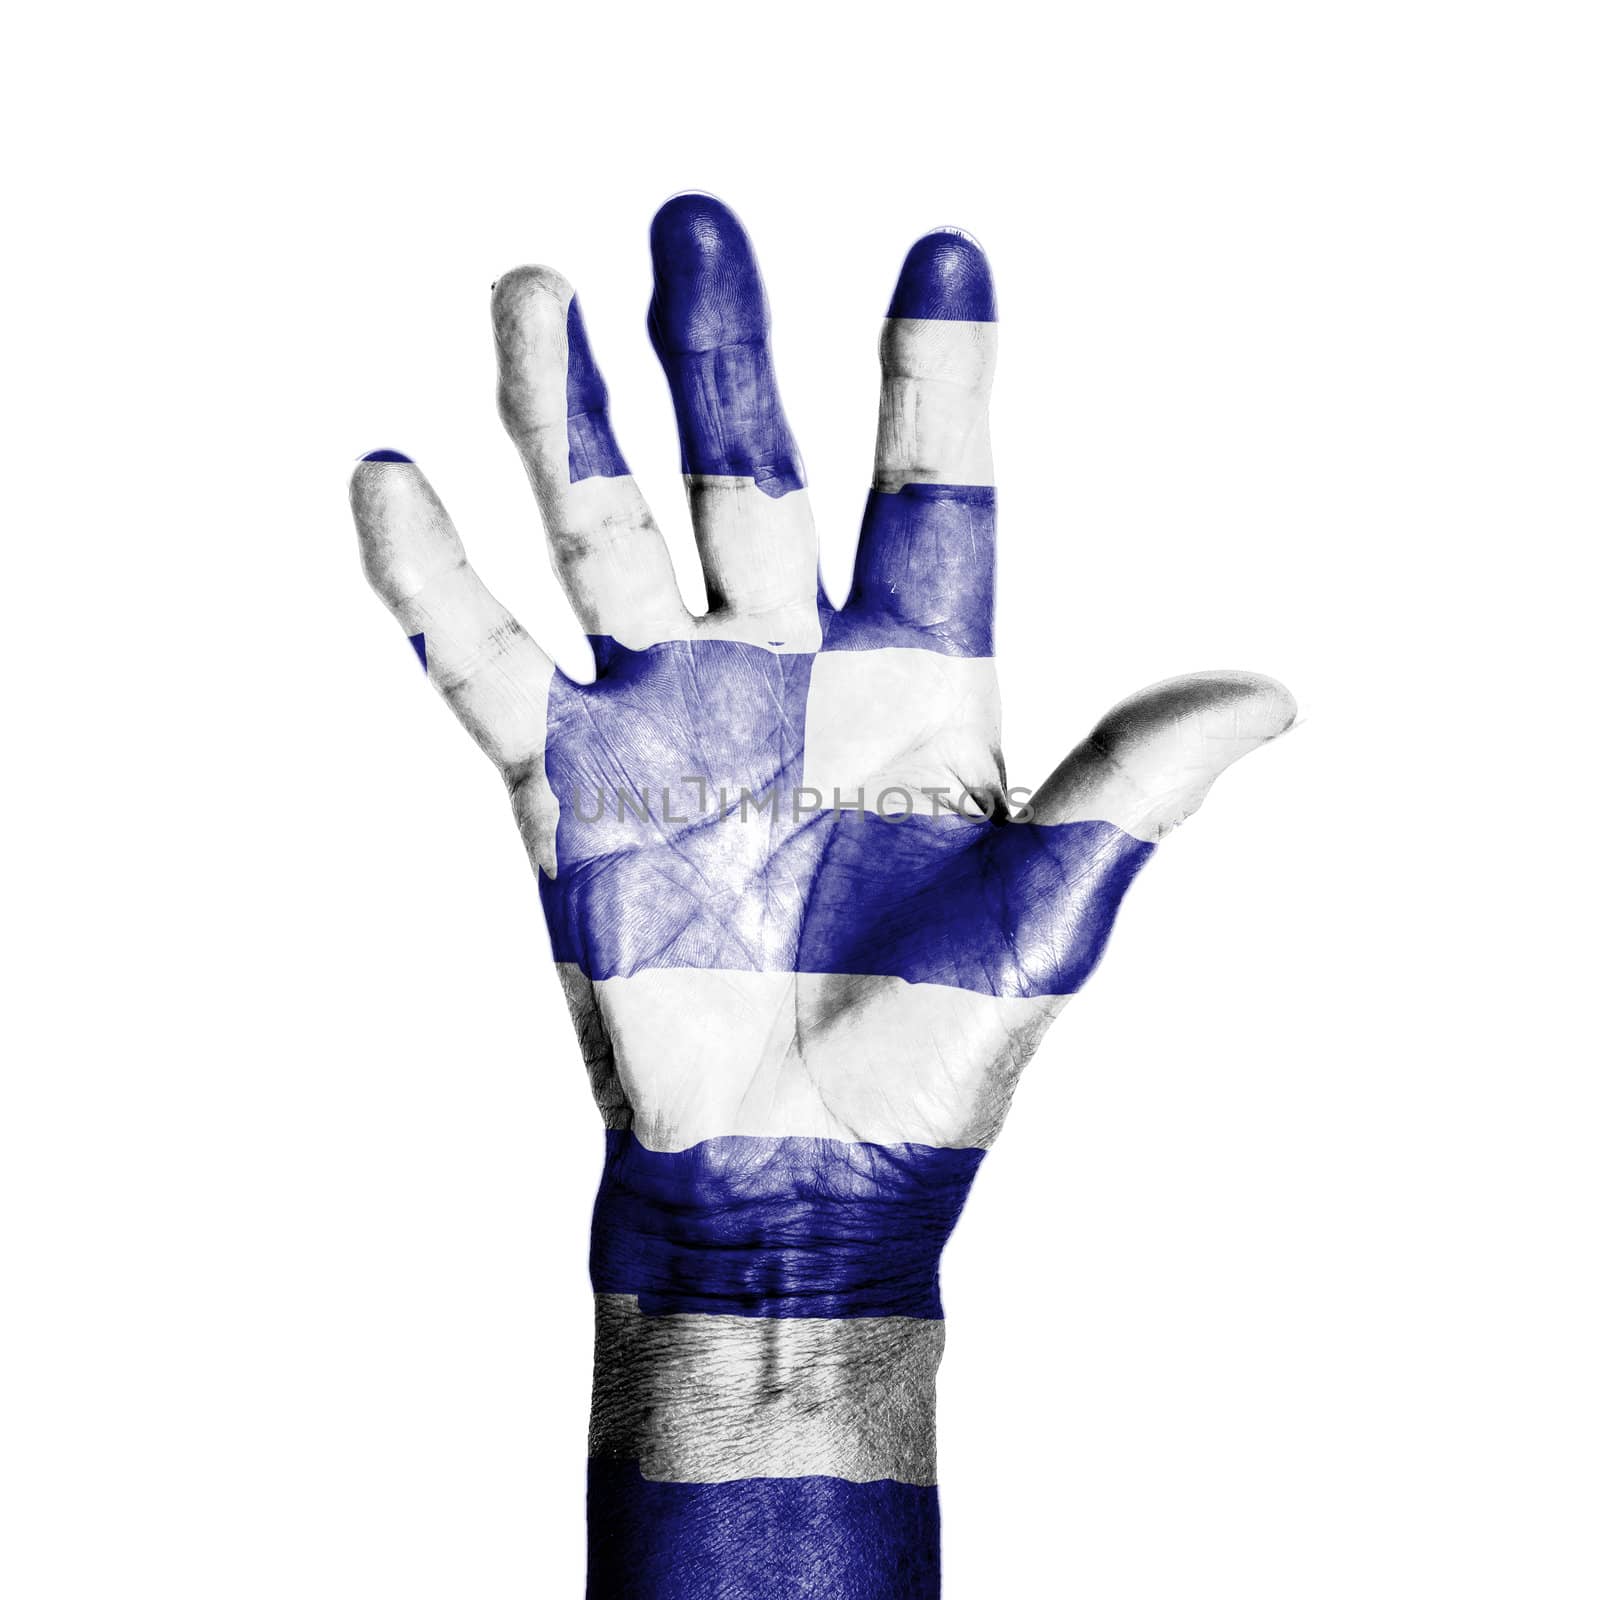 Hand of an old woman, wrapped with a pattern of the flag of Greece, isolated on white